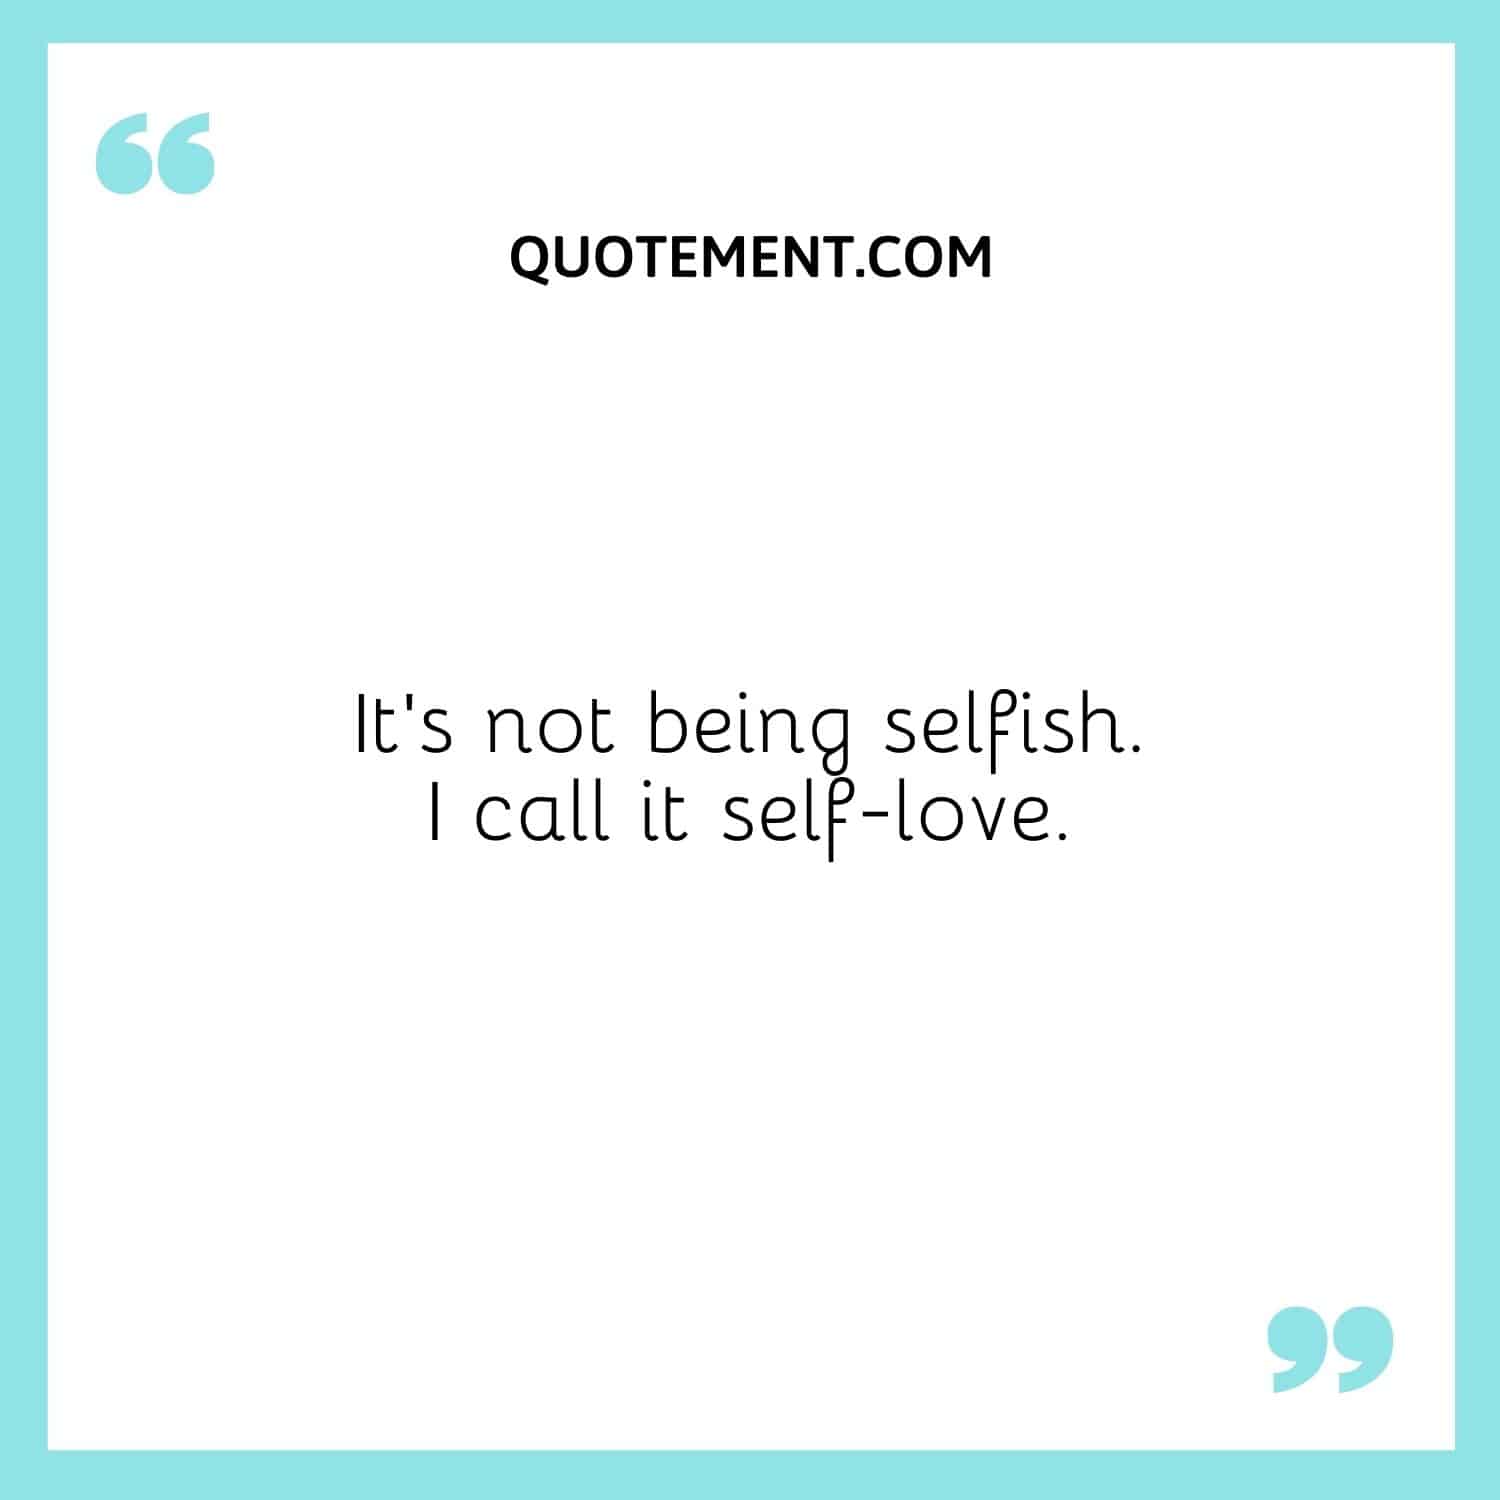 It’s not being selfish. I call it self-love.